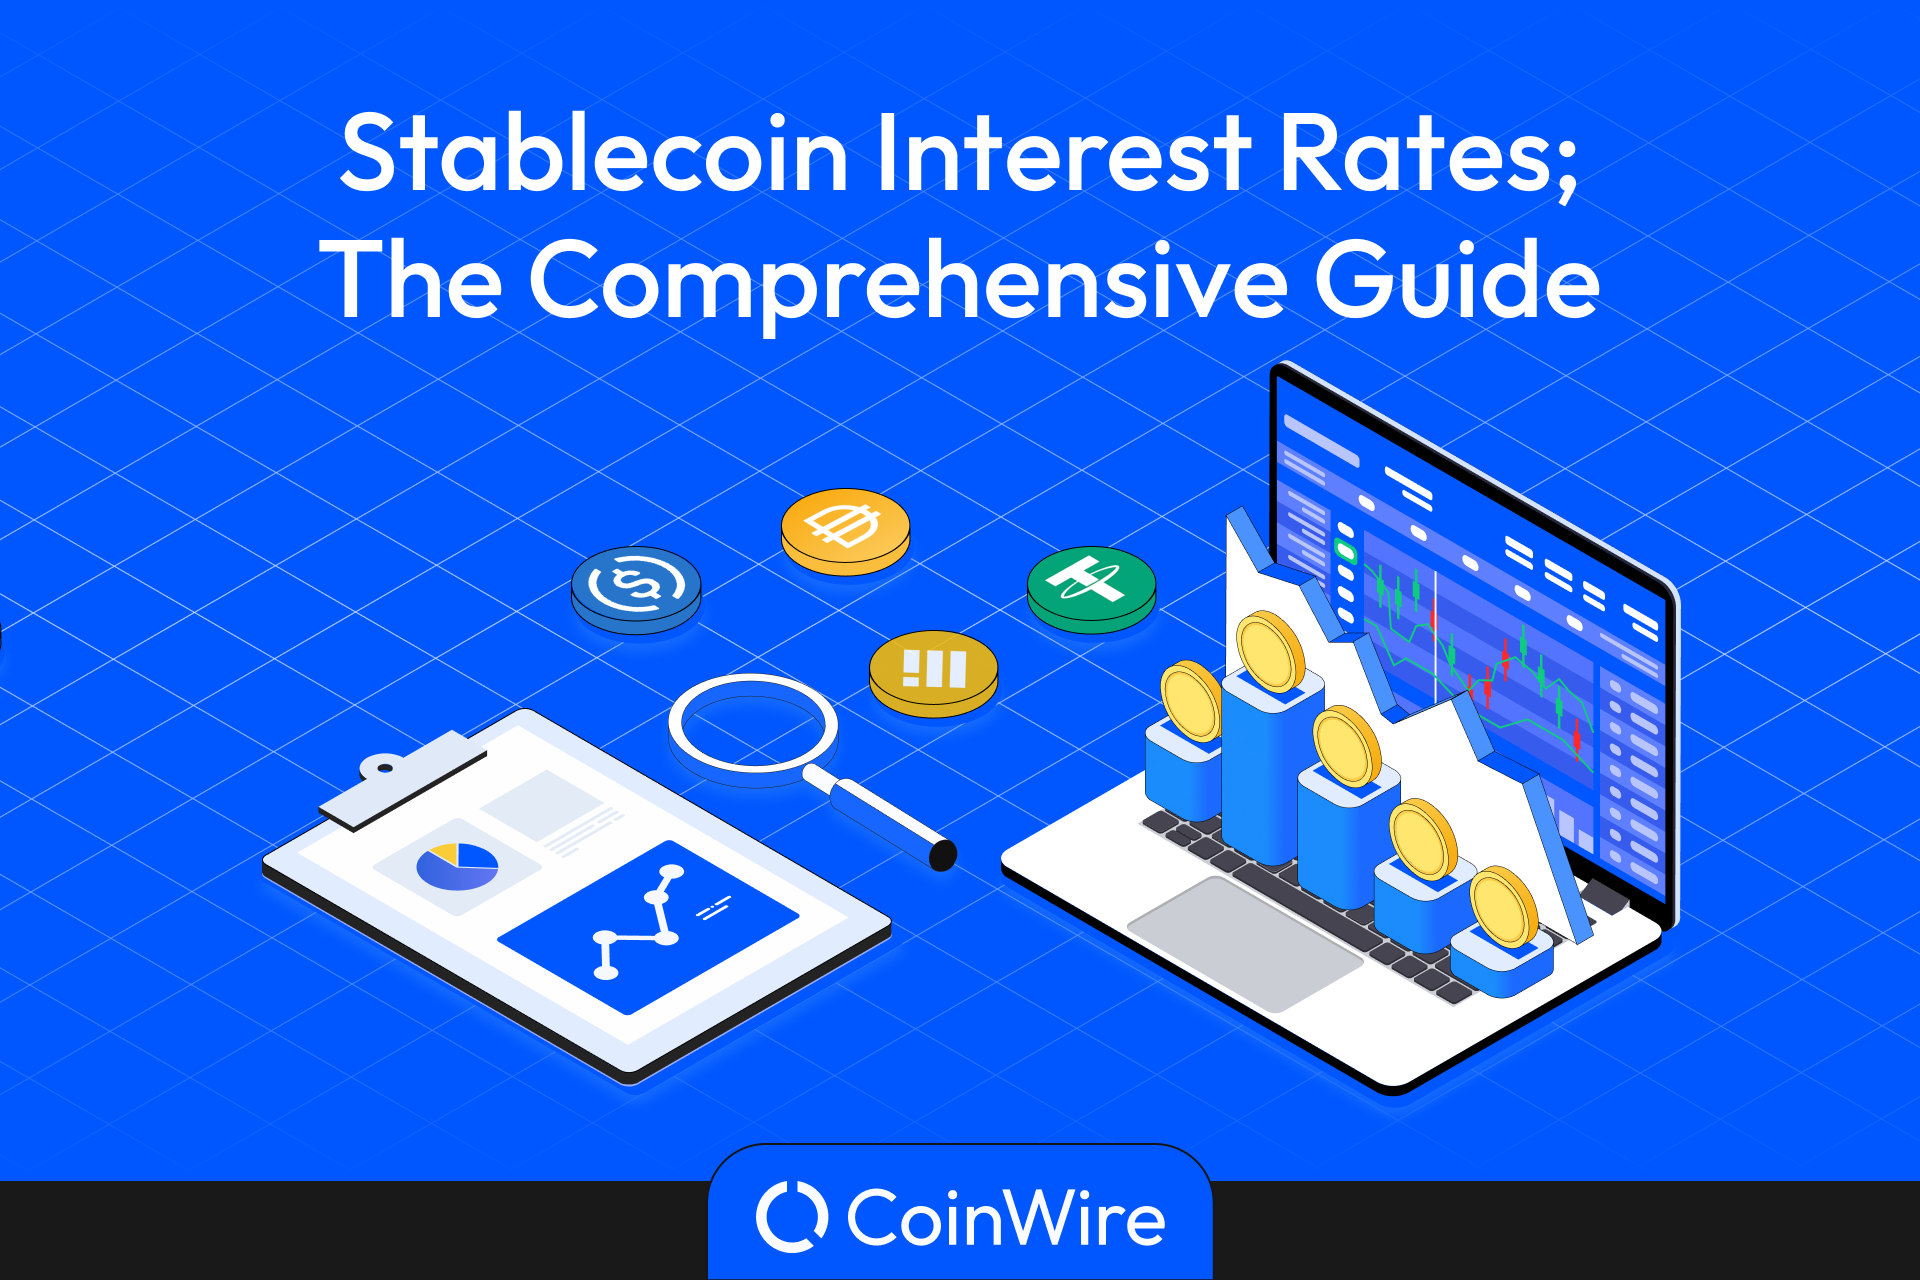 Stablecoin Interest Rates - Featured Image